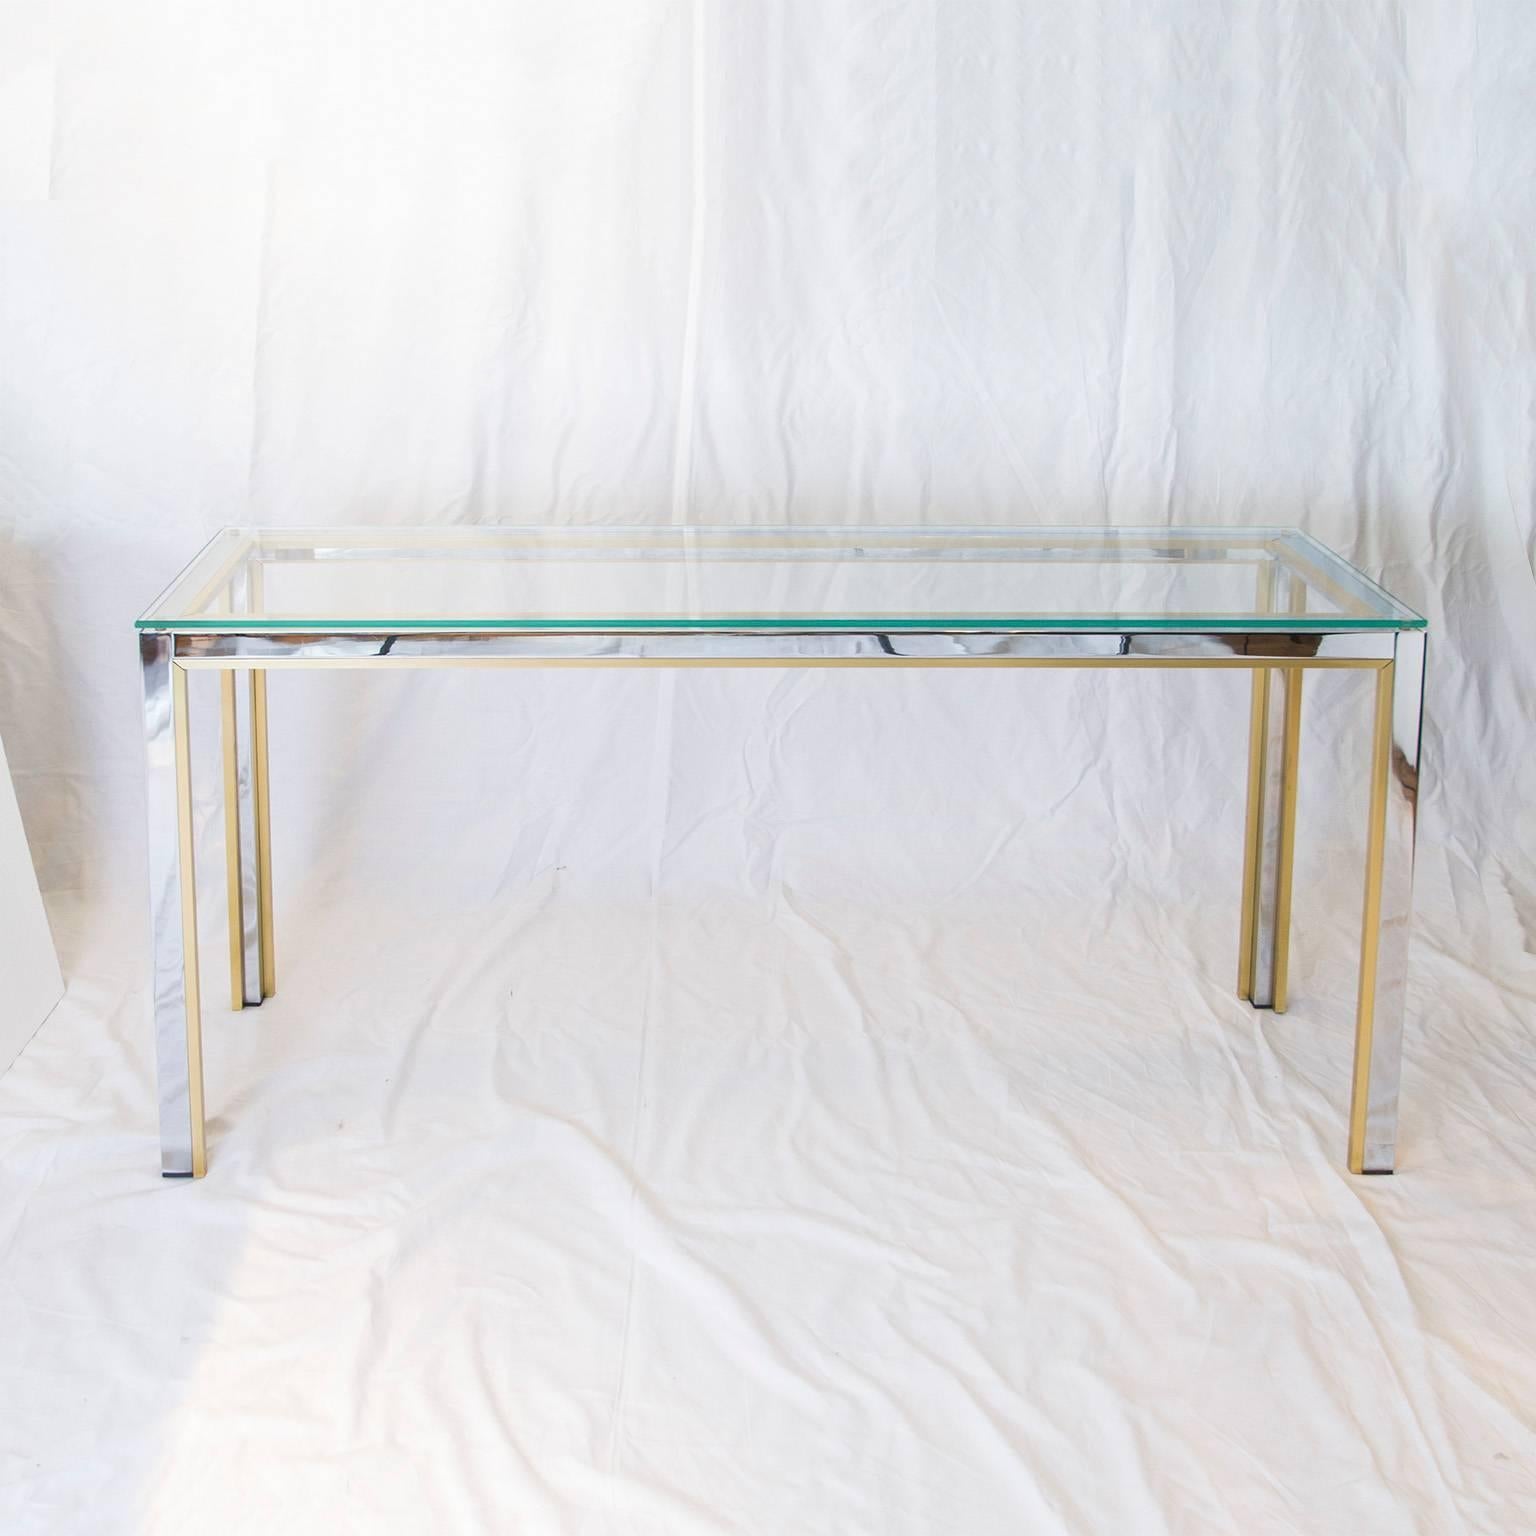 Beautiful console table in chrome and brass with a glass top by Romeo Rega, 1970s.

Please contact us for delivery details.